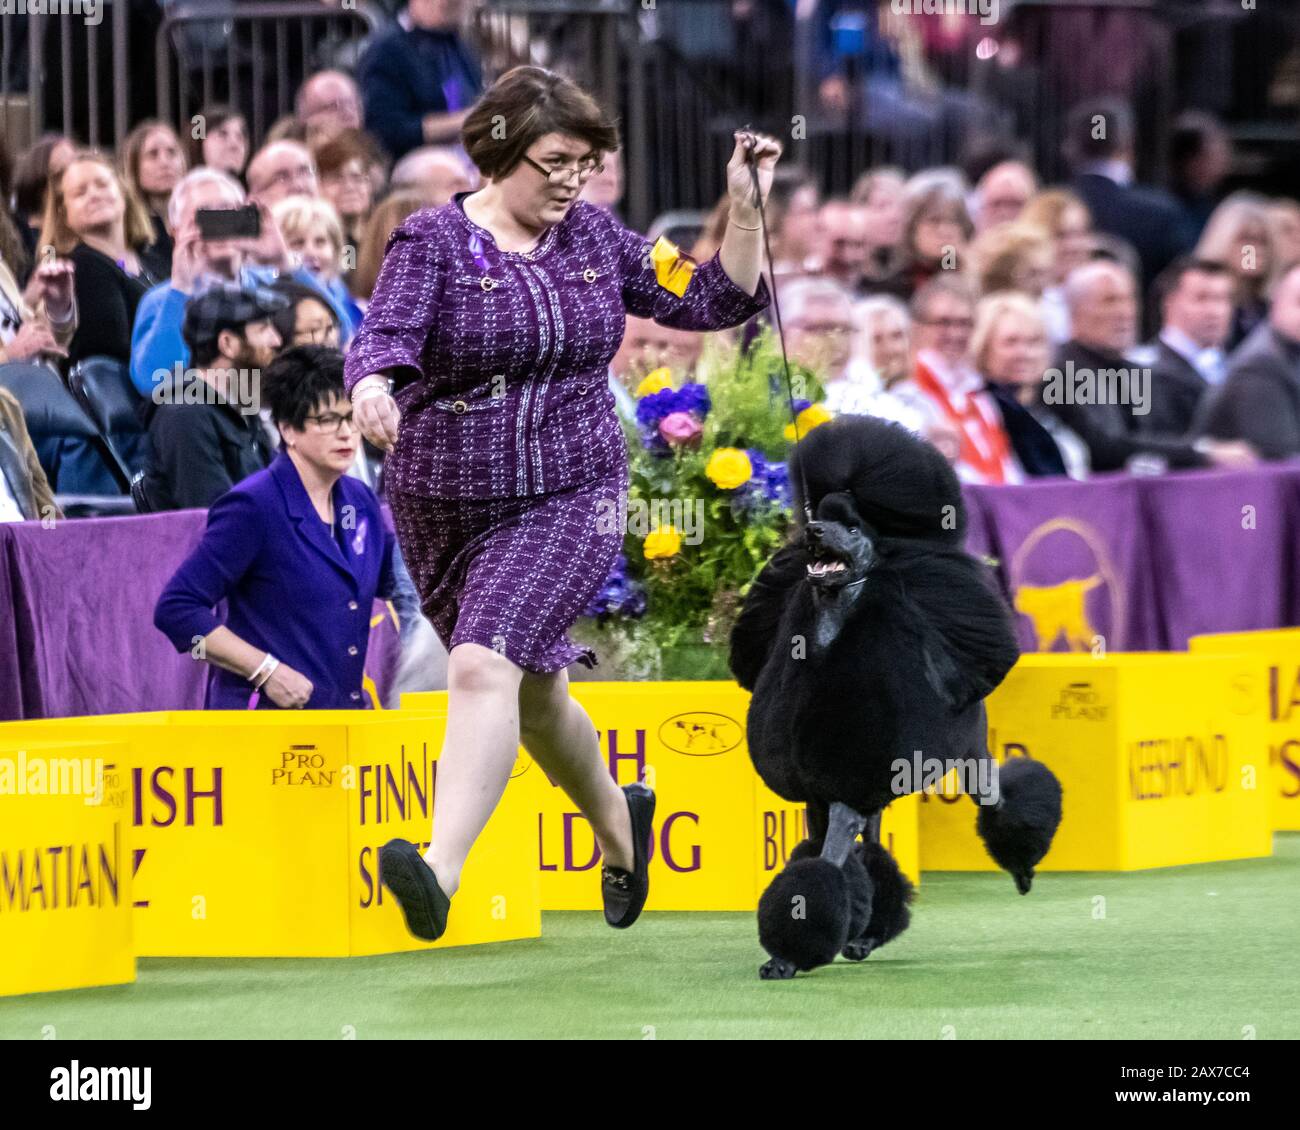 New York, USA. 10th Feb, 2020. Handler Chrystal Clas from Northampton, Pennsylvania, leads her Standard Poodle Siba to victory in the Non-sporting group category at the 144th Westminster Kennel Club Dog show in New York city's Madison Square Garden.  GCHP Stone Run Afternoon Tea, aka Siba, owned by Connie Unger and William Lee, also won Best of Breed for standard poodles earlier in the day. Credit: Enrique Shore/Alamy Live News Stock Photo